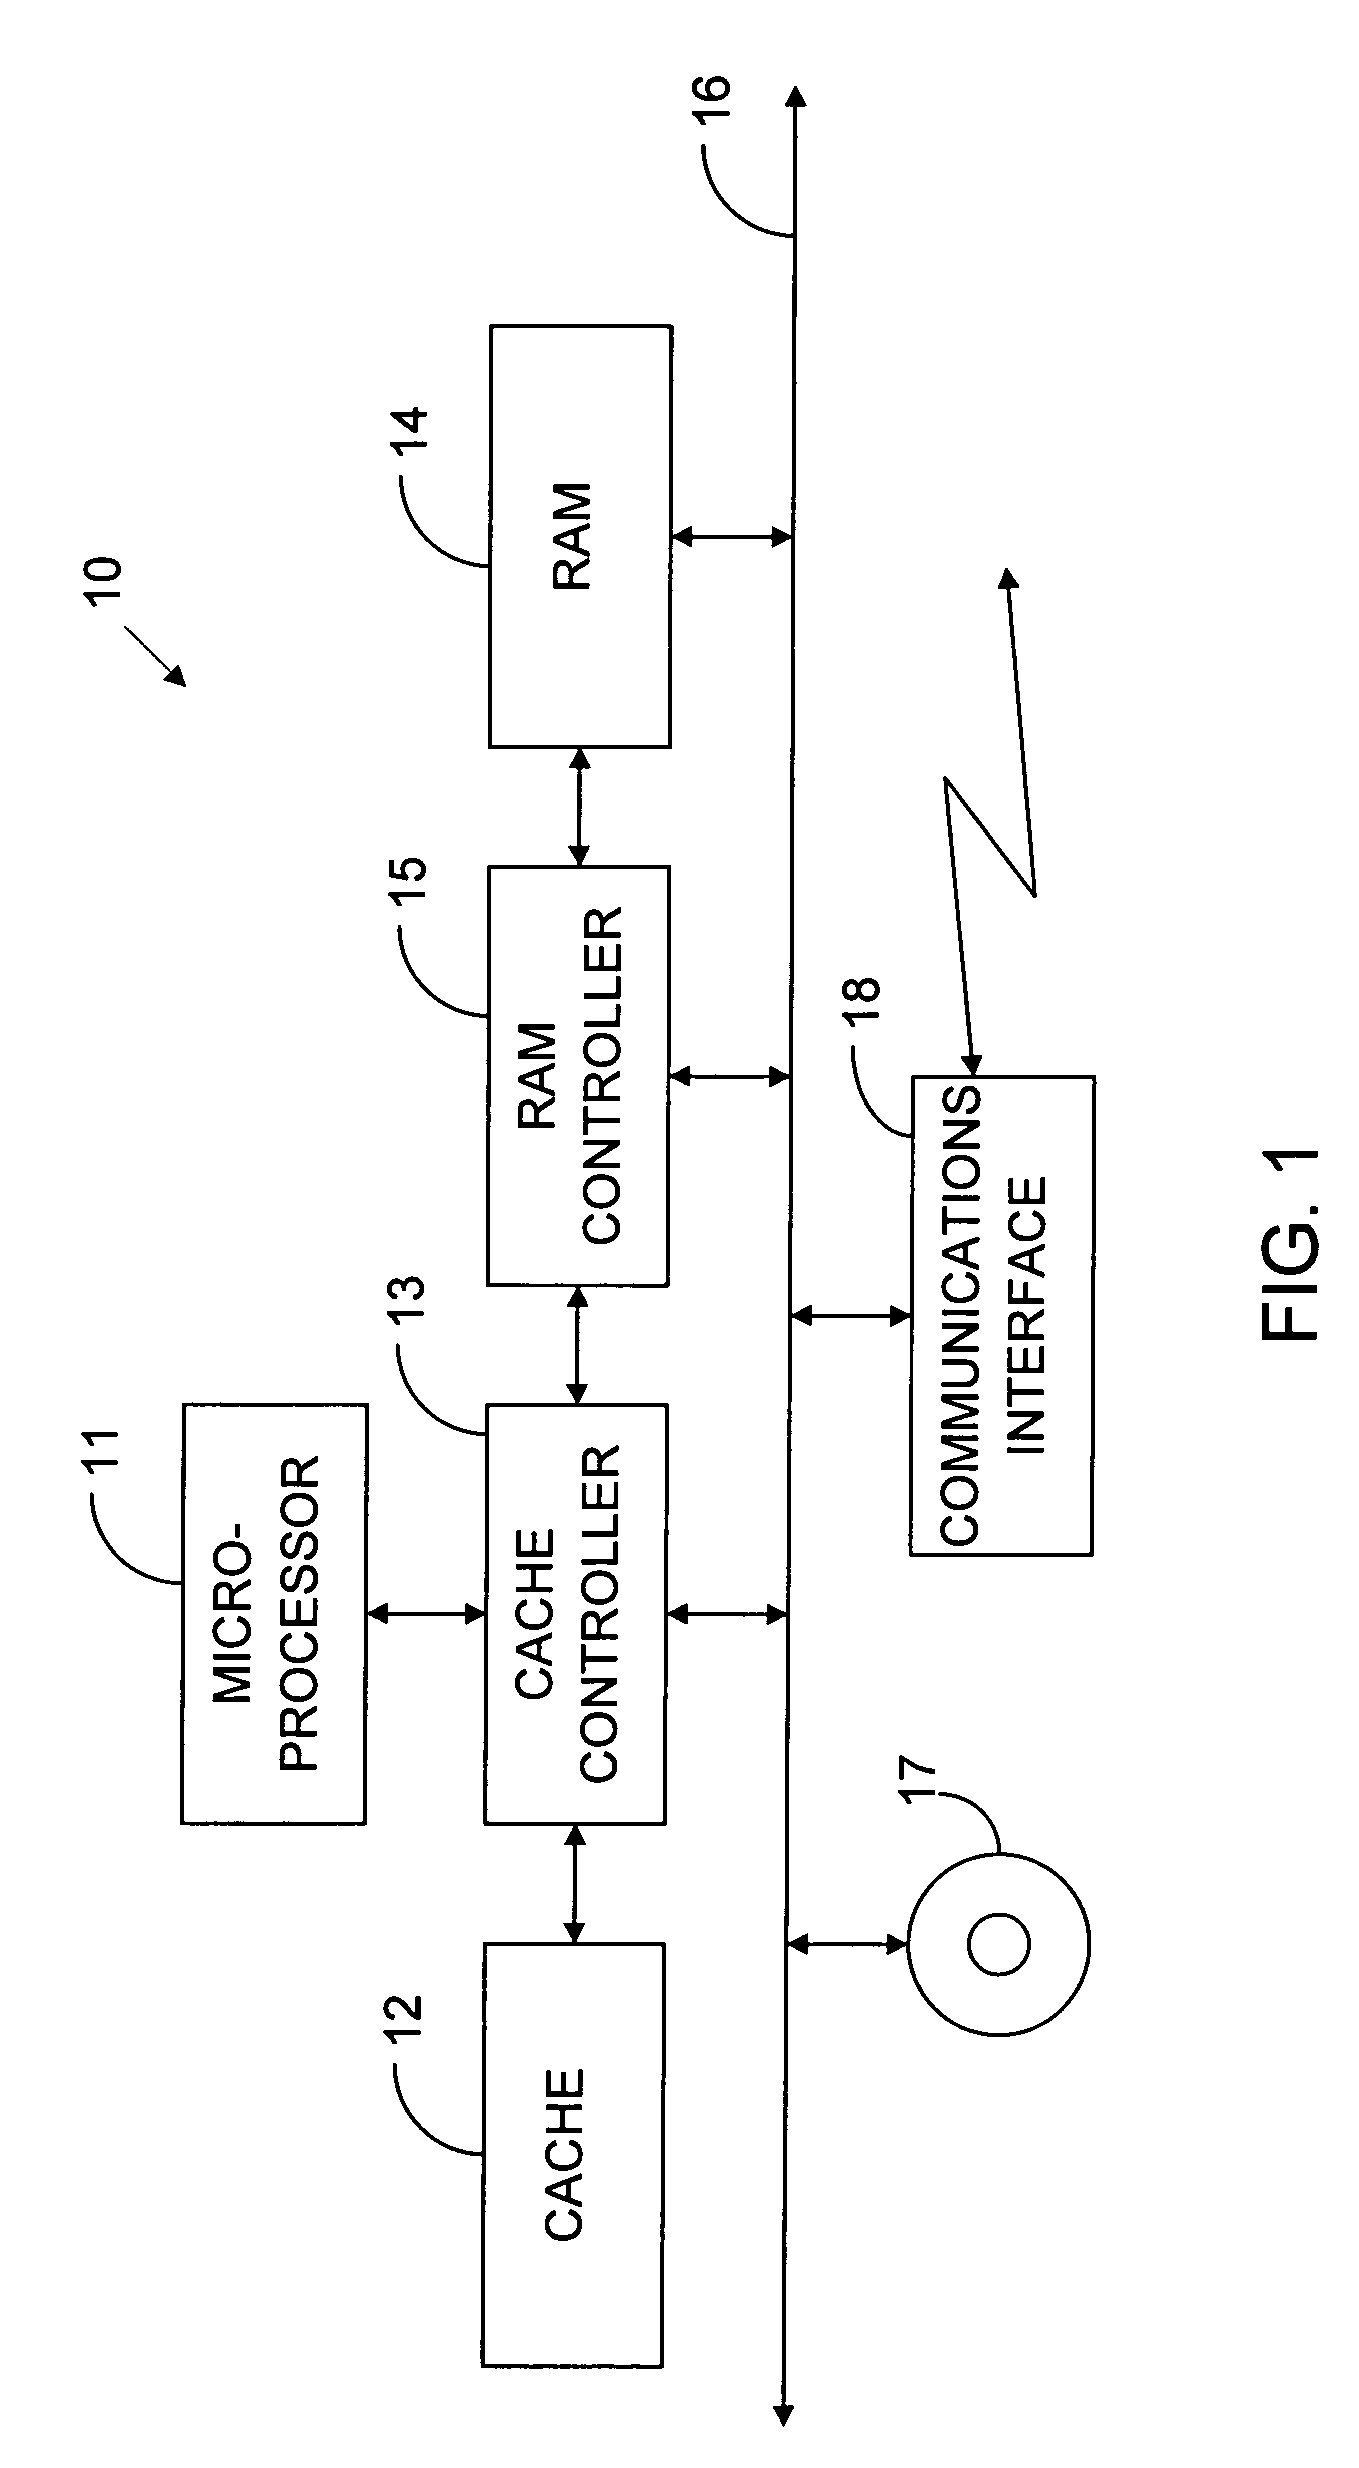 Concurrent incremental garbage collector with a card table summarizing modified reference locations